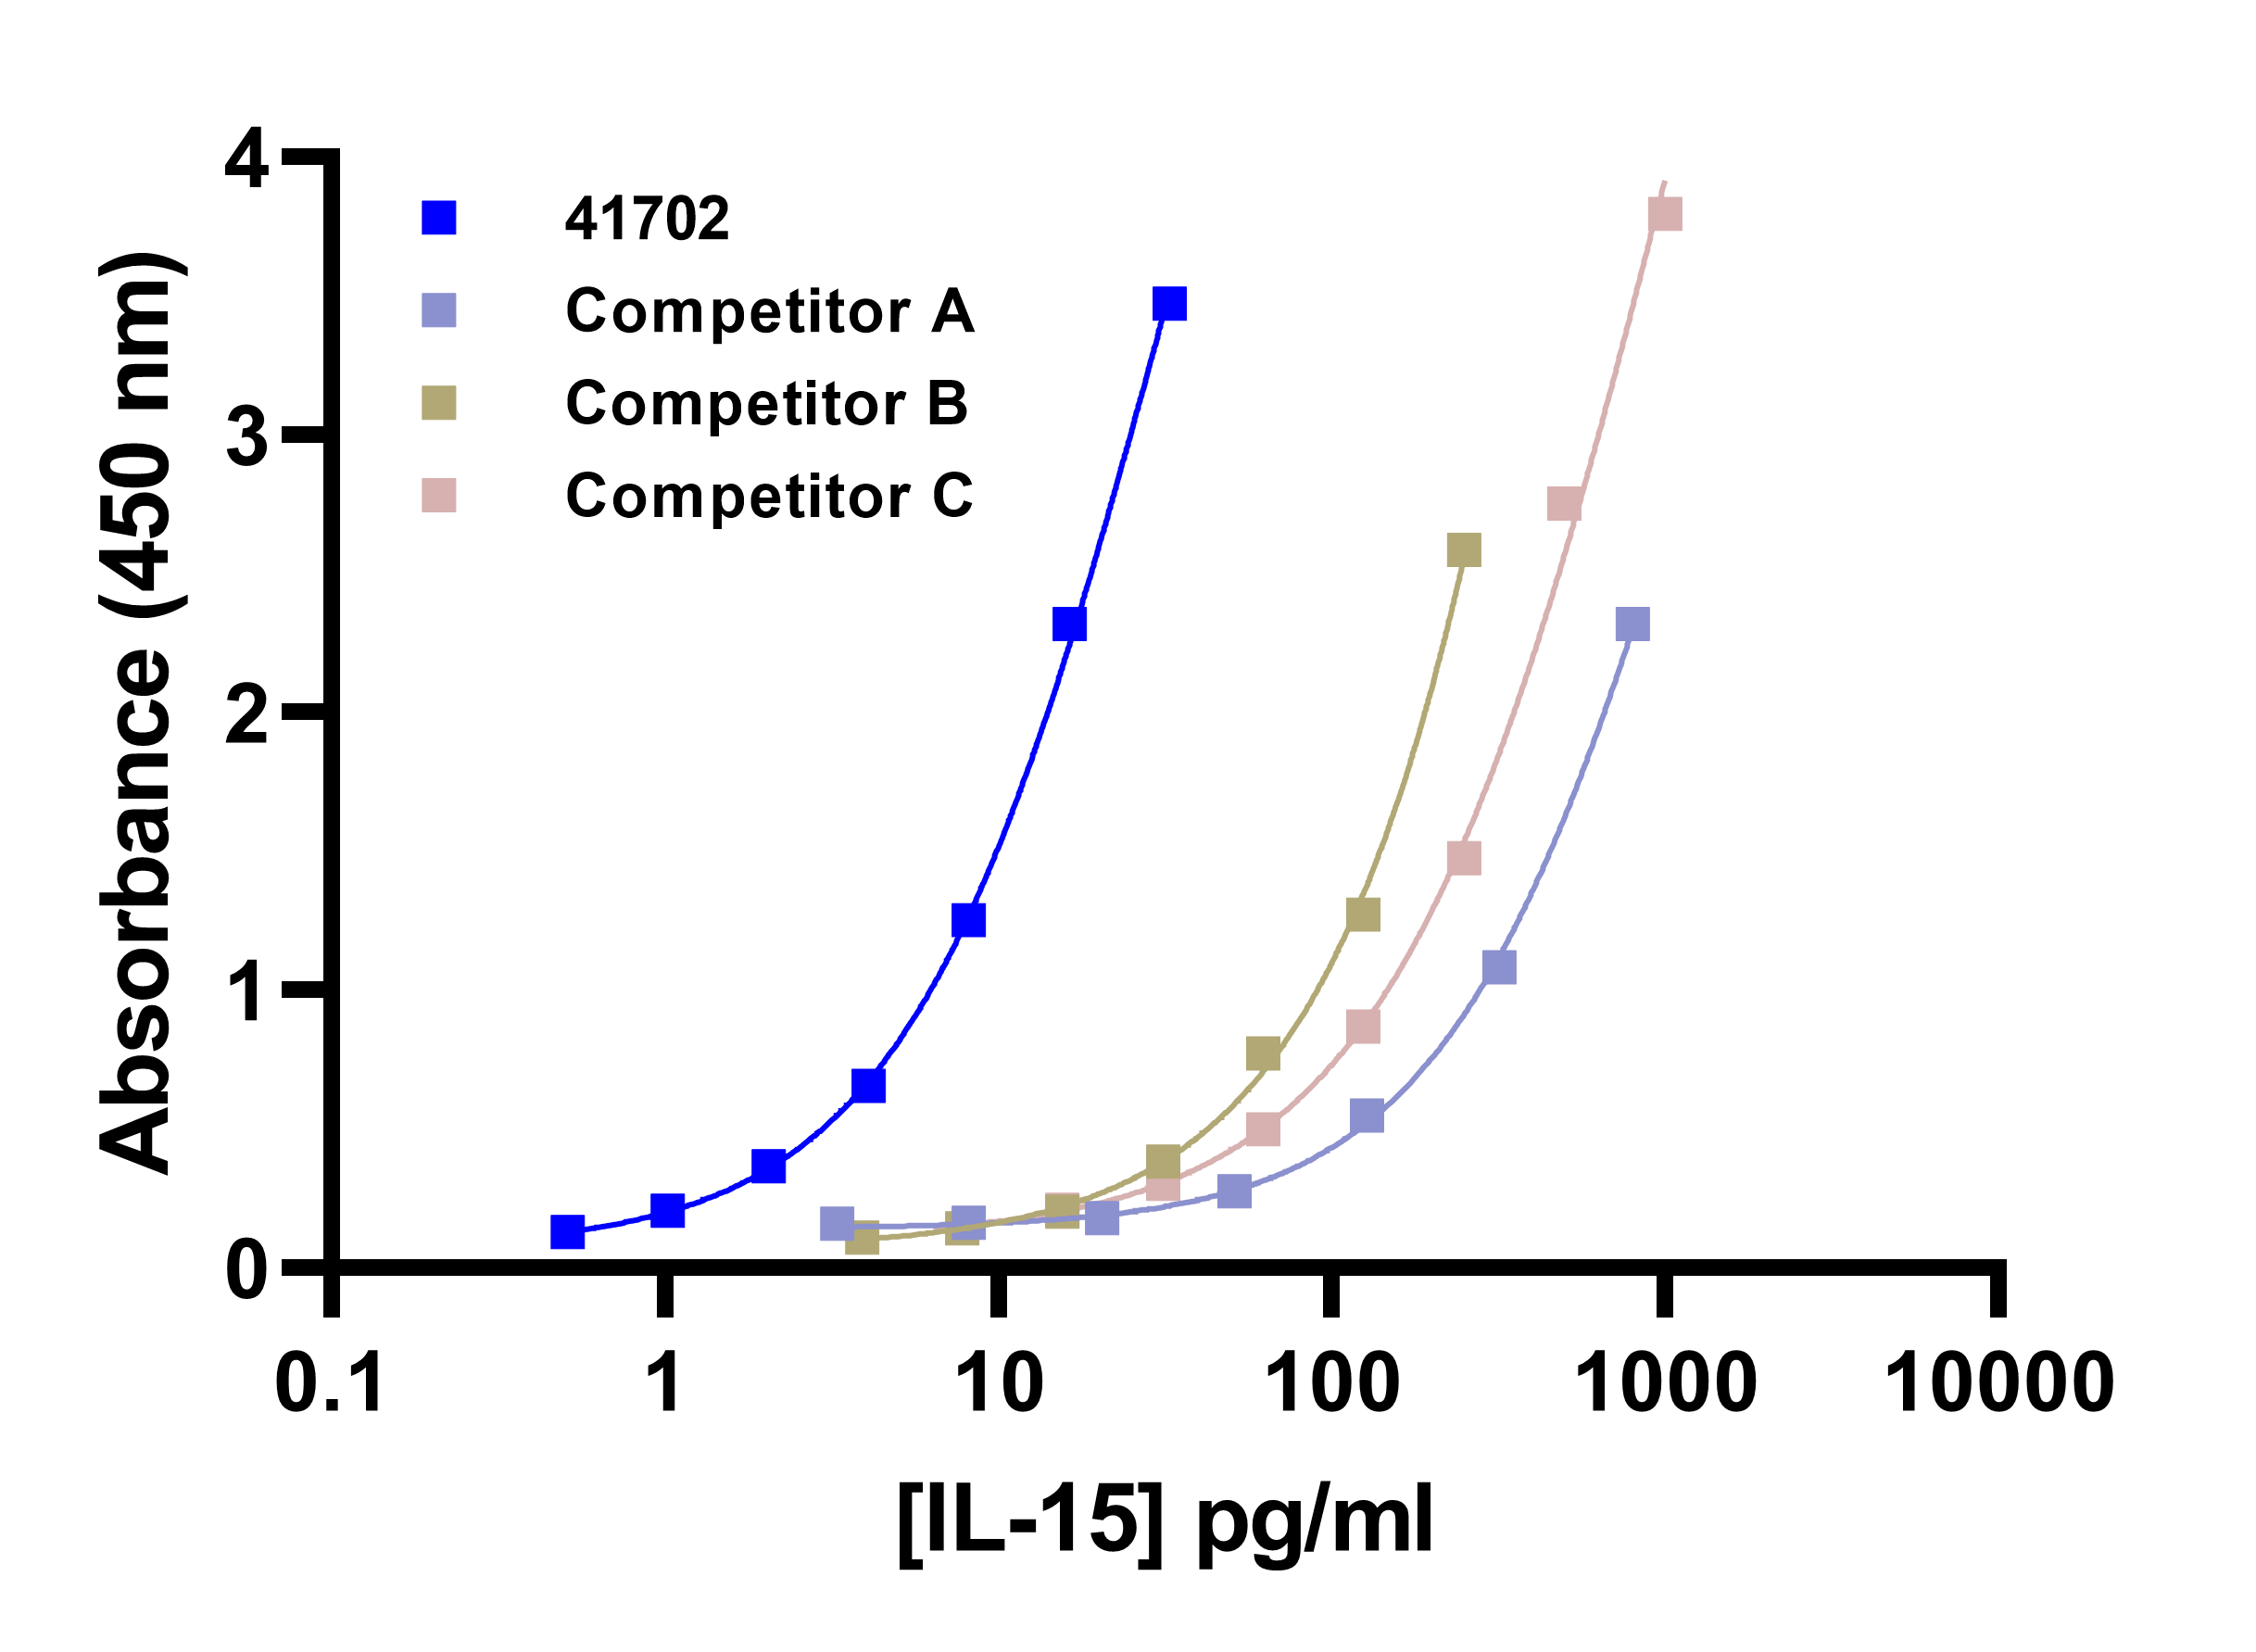 Dose response curves and absorbance values of all IL-15 standards are shown below. PBL’s standard exhibited greater sensitivity than competitive IL-15 standards